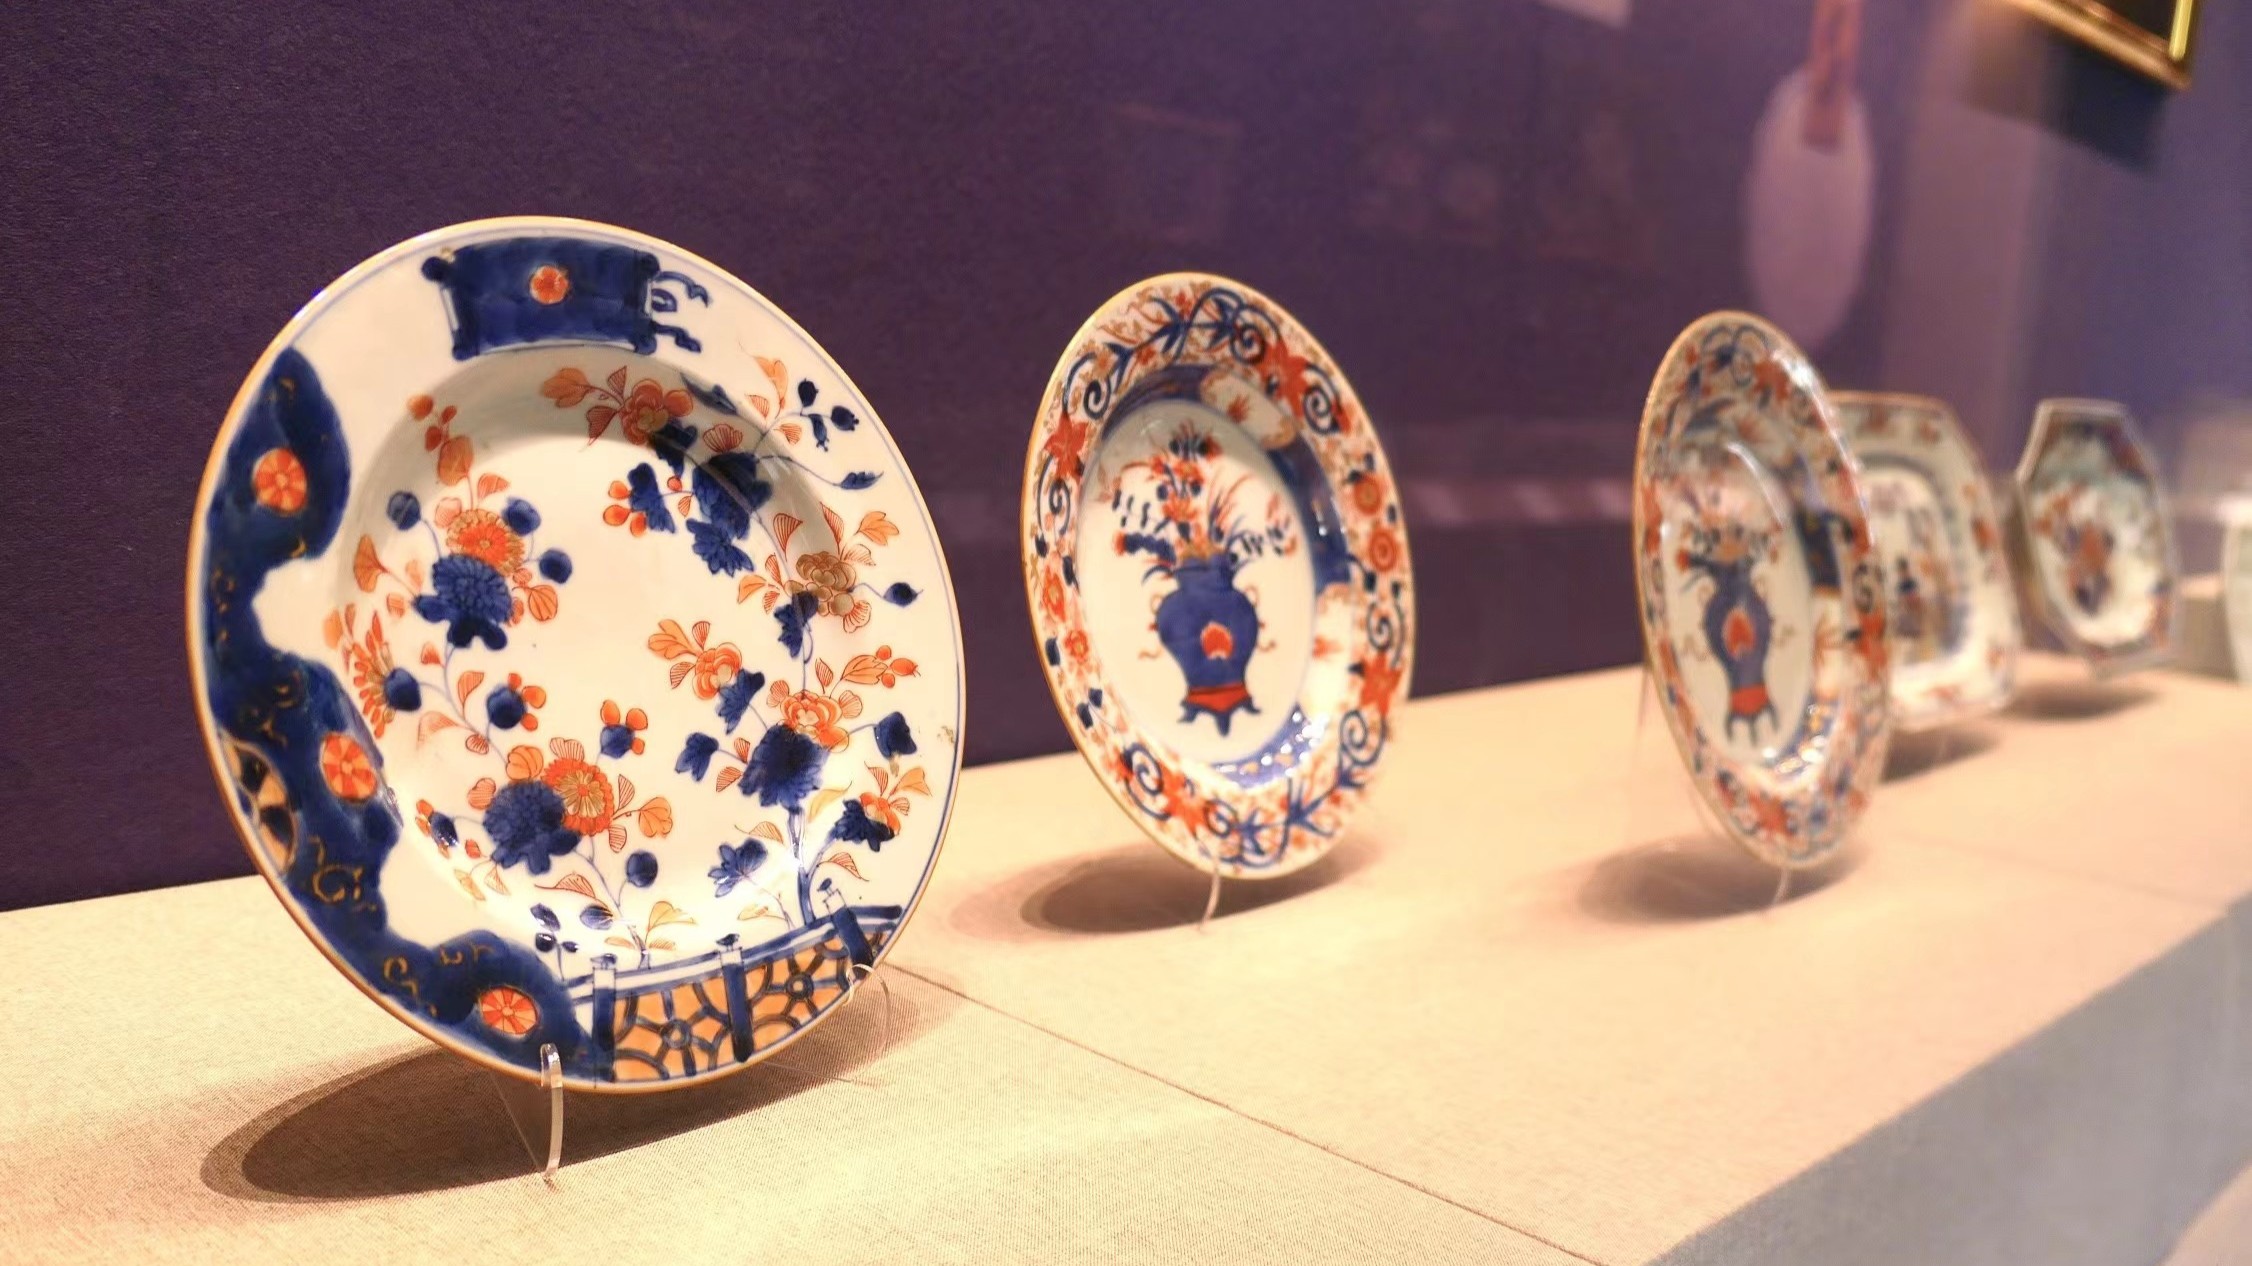 Insight into 'Chinese Wisdom' through export porcelain